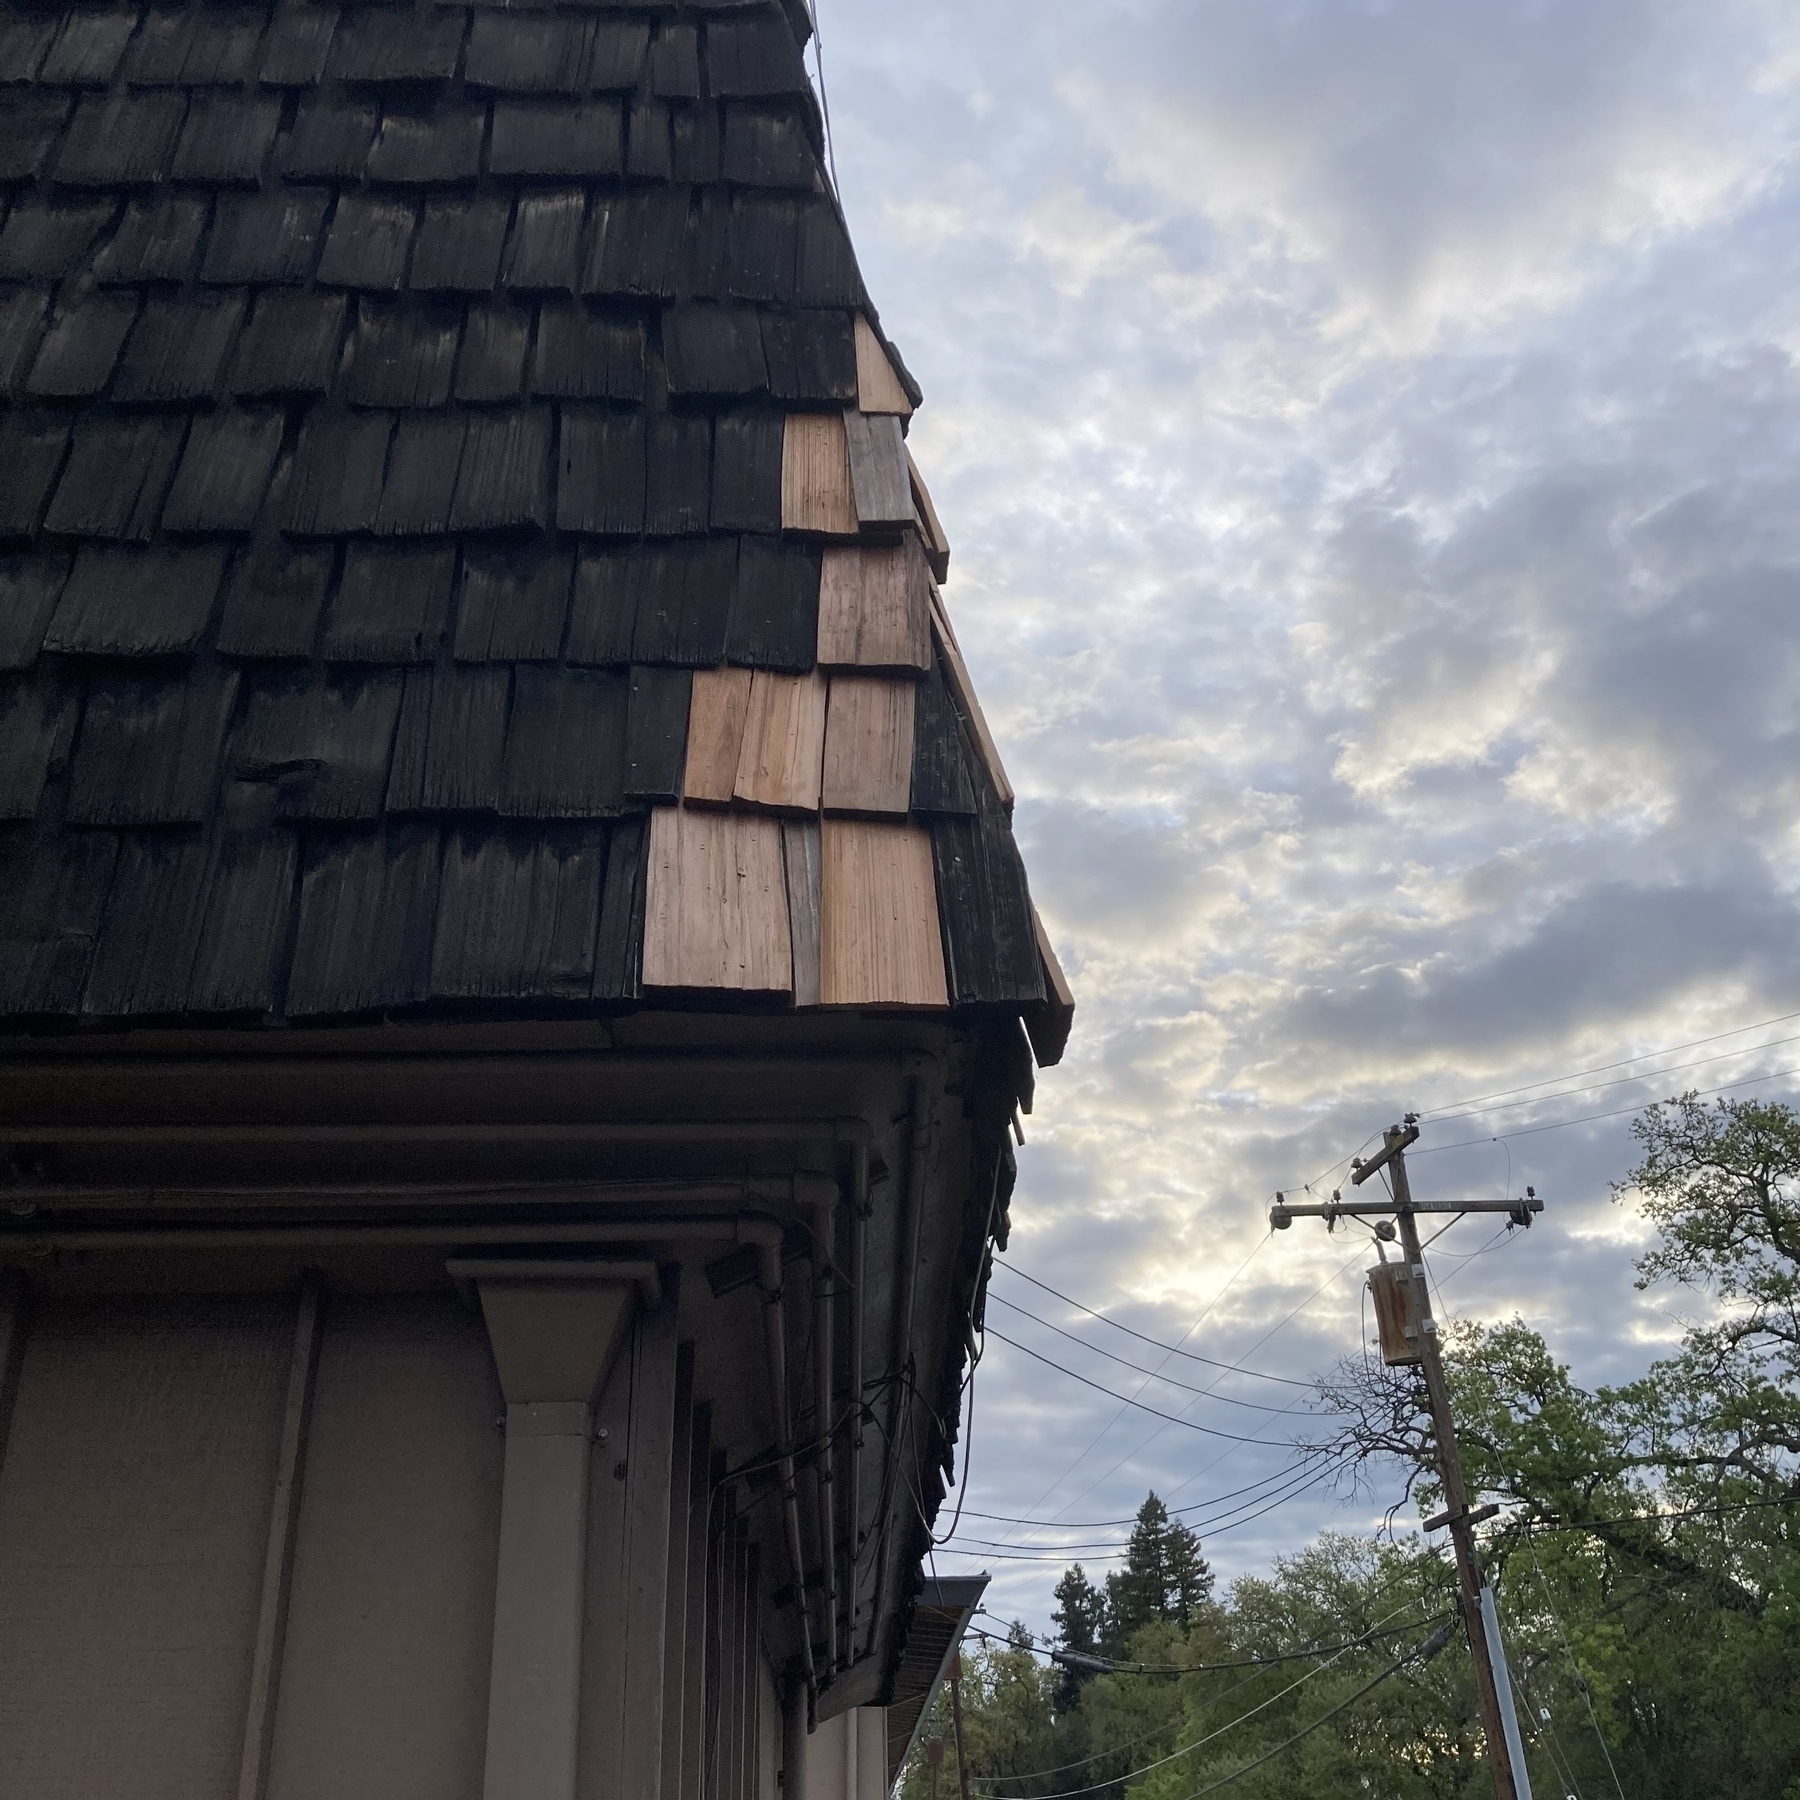 Roof tiles that have been replaced are noticeable from the old tiles. 